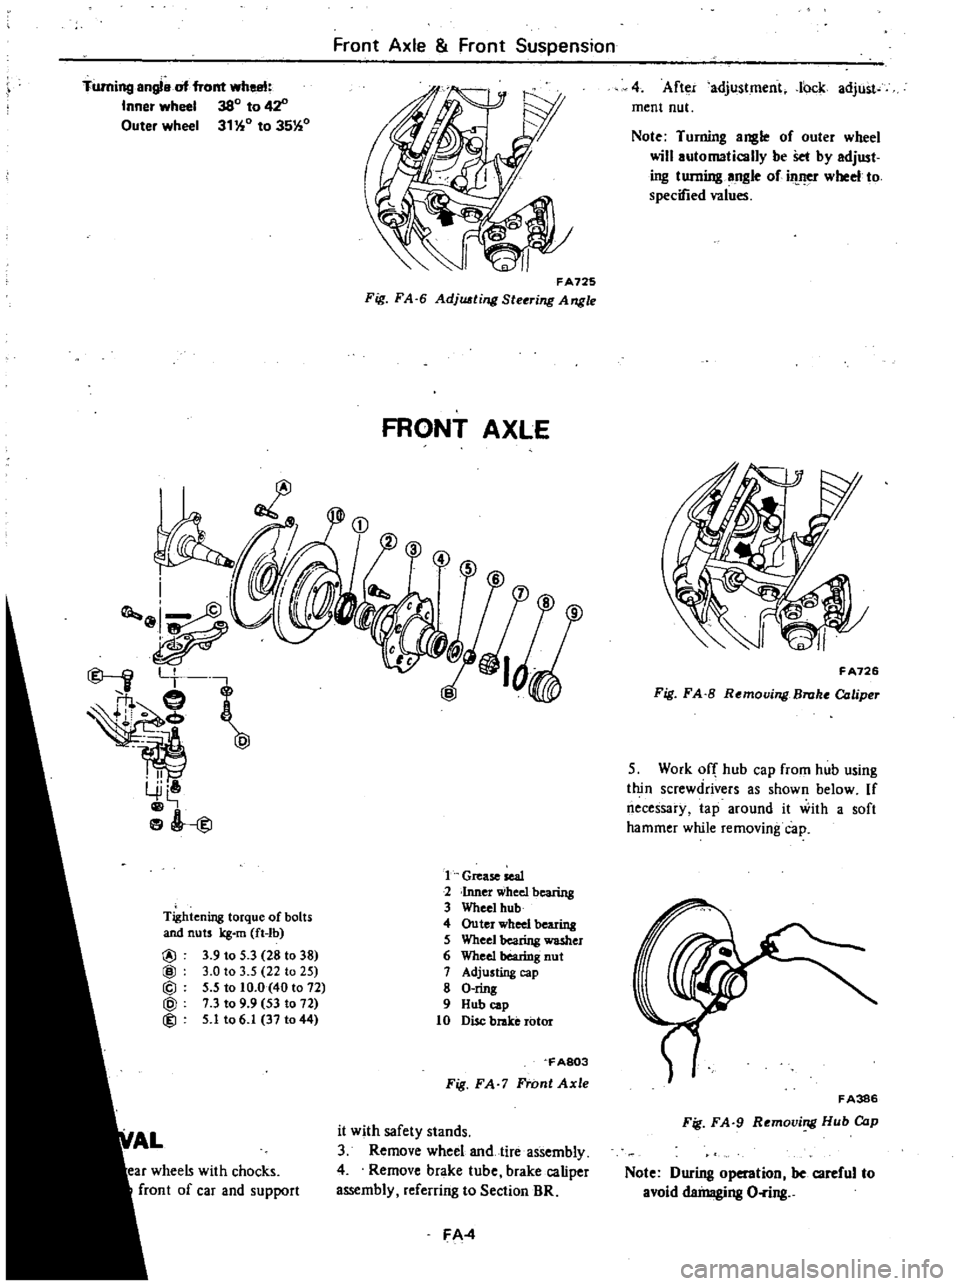 DATSUN 210 1979  Service Manual 
Turning 
engie 
of 
front

wheel

Inner 
wheel 
380 
to

42

Outel 
wheel 
31 
0

to 
35 
0

Tightening 
torque 
of 
bolts

and 
nuts

kg 
m

ft 
lb

@ 
3

9 
to 
5 
3 
28 
to 
38

@ 
3 
0 
to 
3 
5
